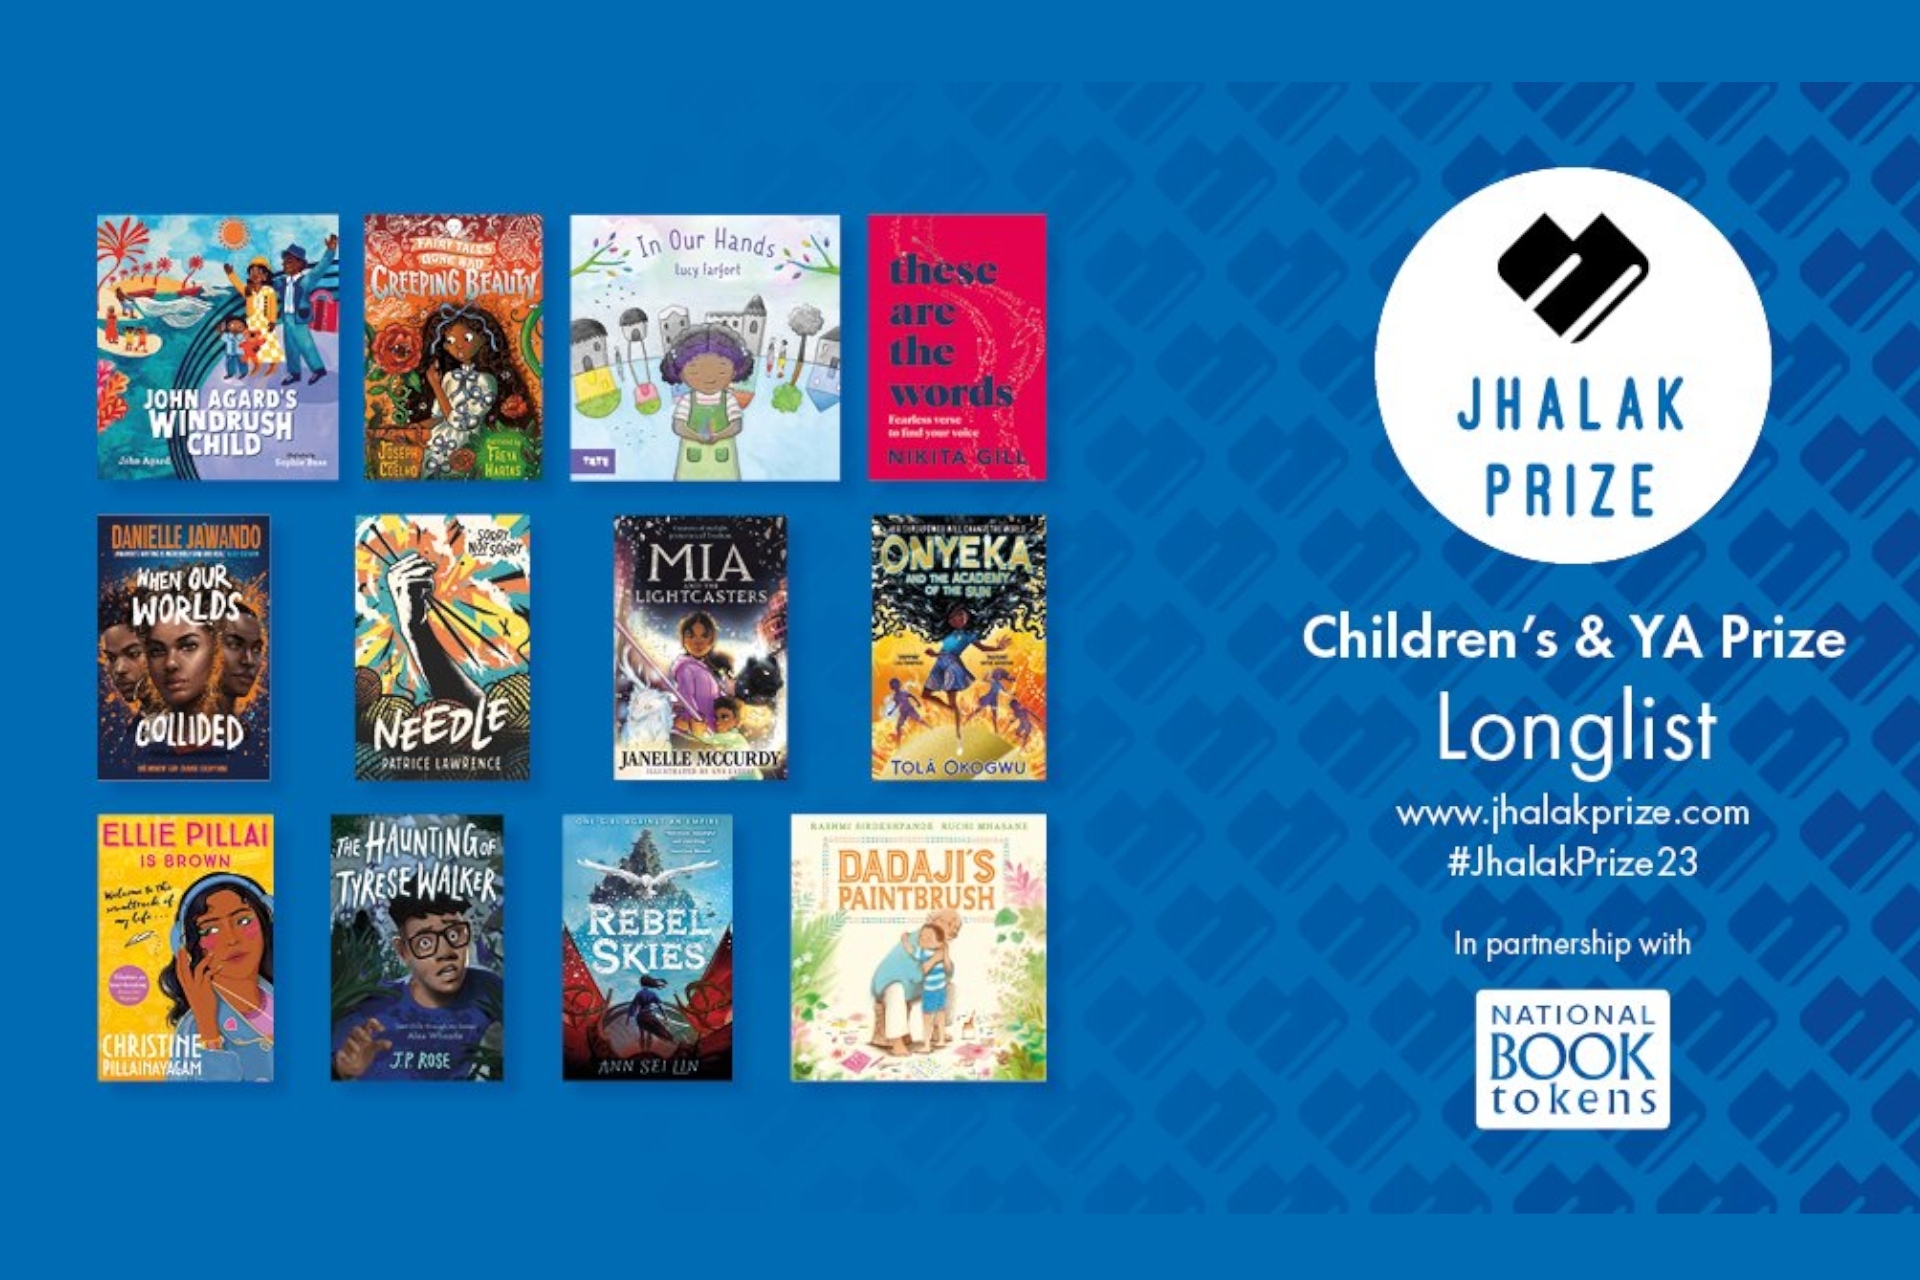 Jhalak Children’s & Young Adult Prize Longlist Announced Celebrating British or British-resident Writers of Colour